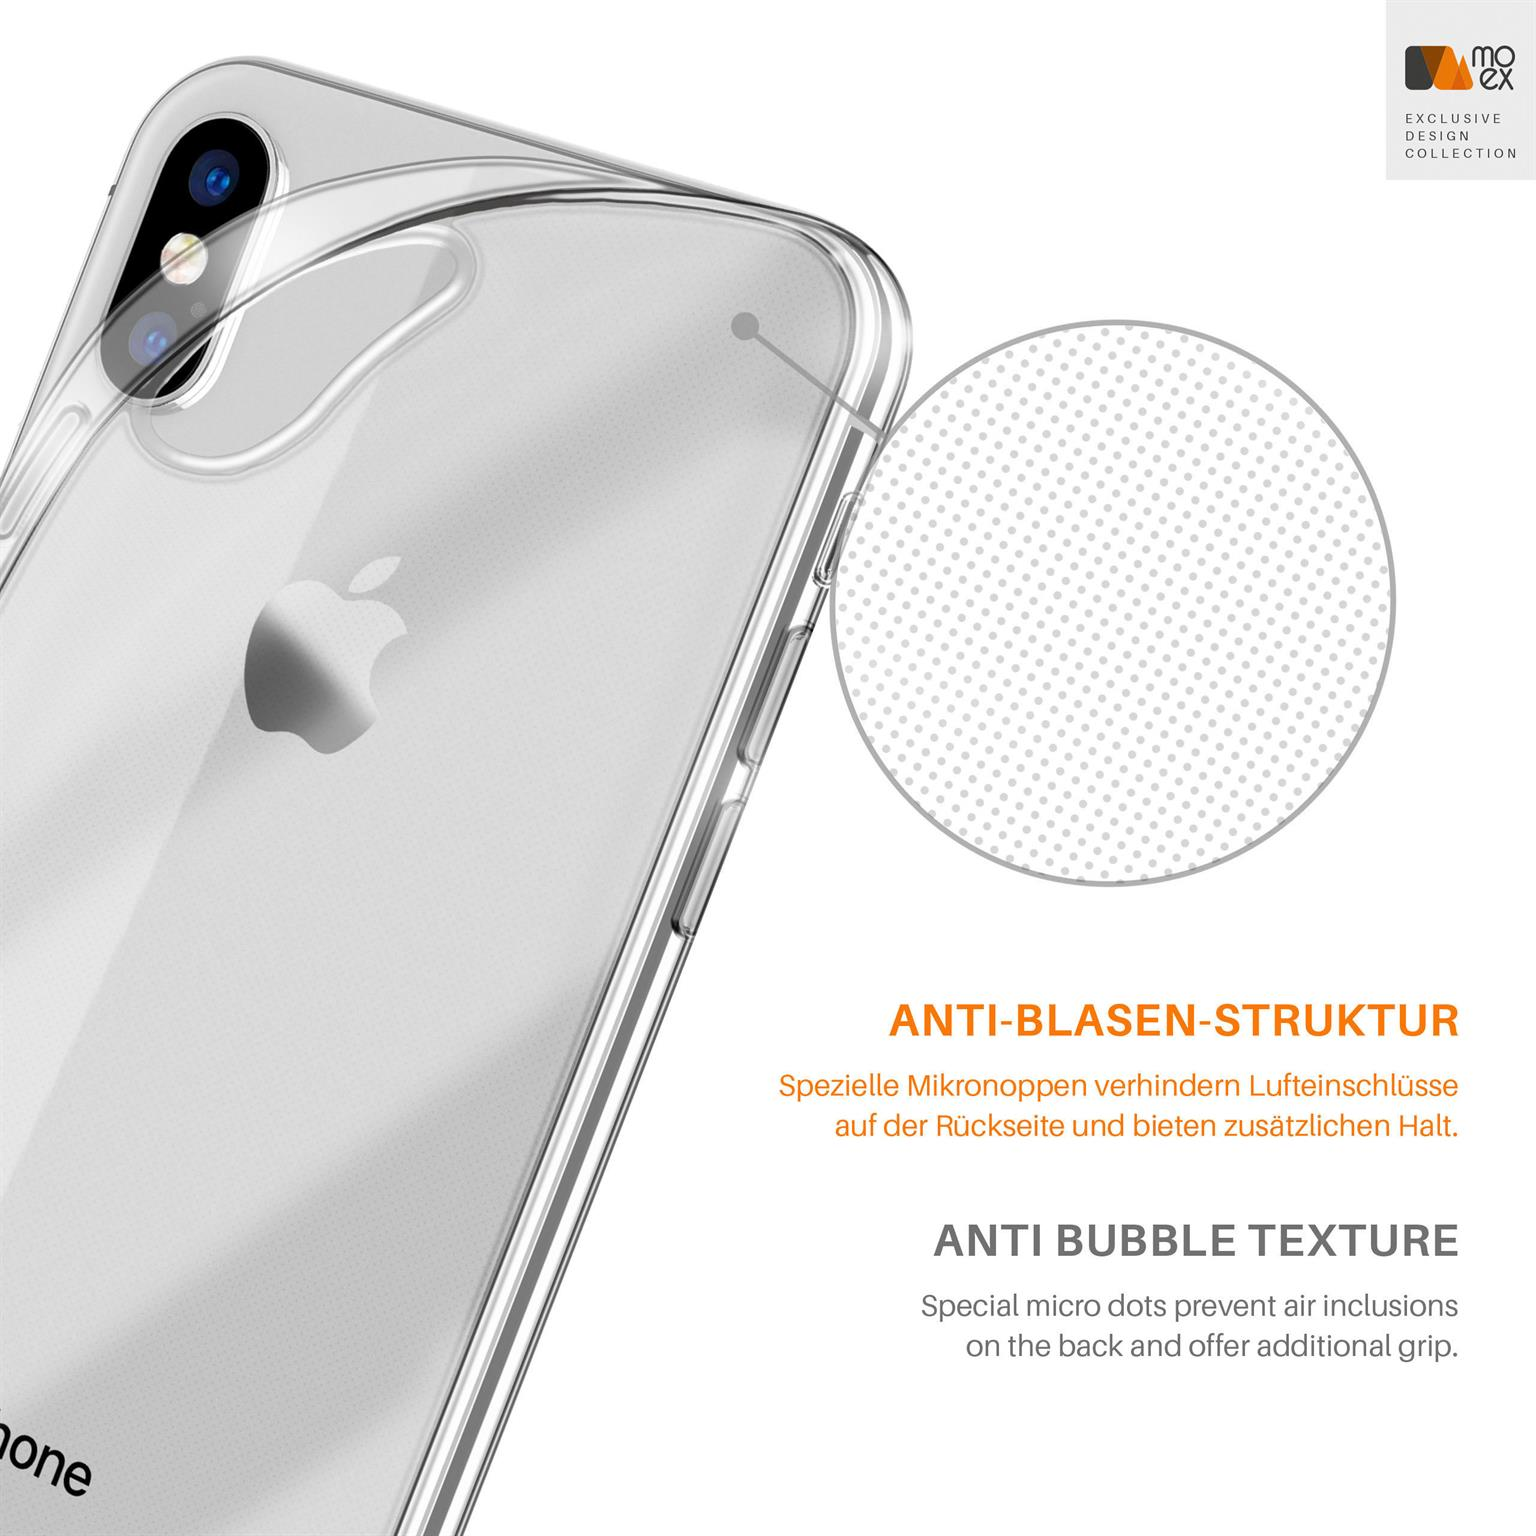 Backcover, iPhone Aero XS Max, MOEX Apple, Case, Crystal-Clear